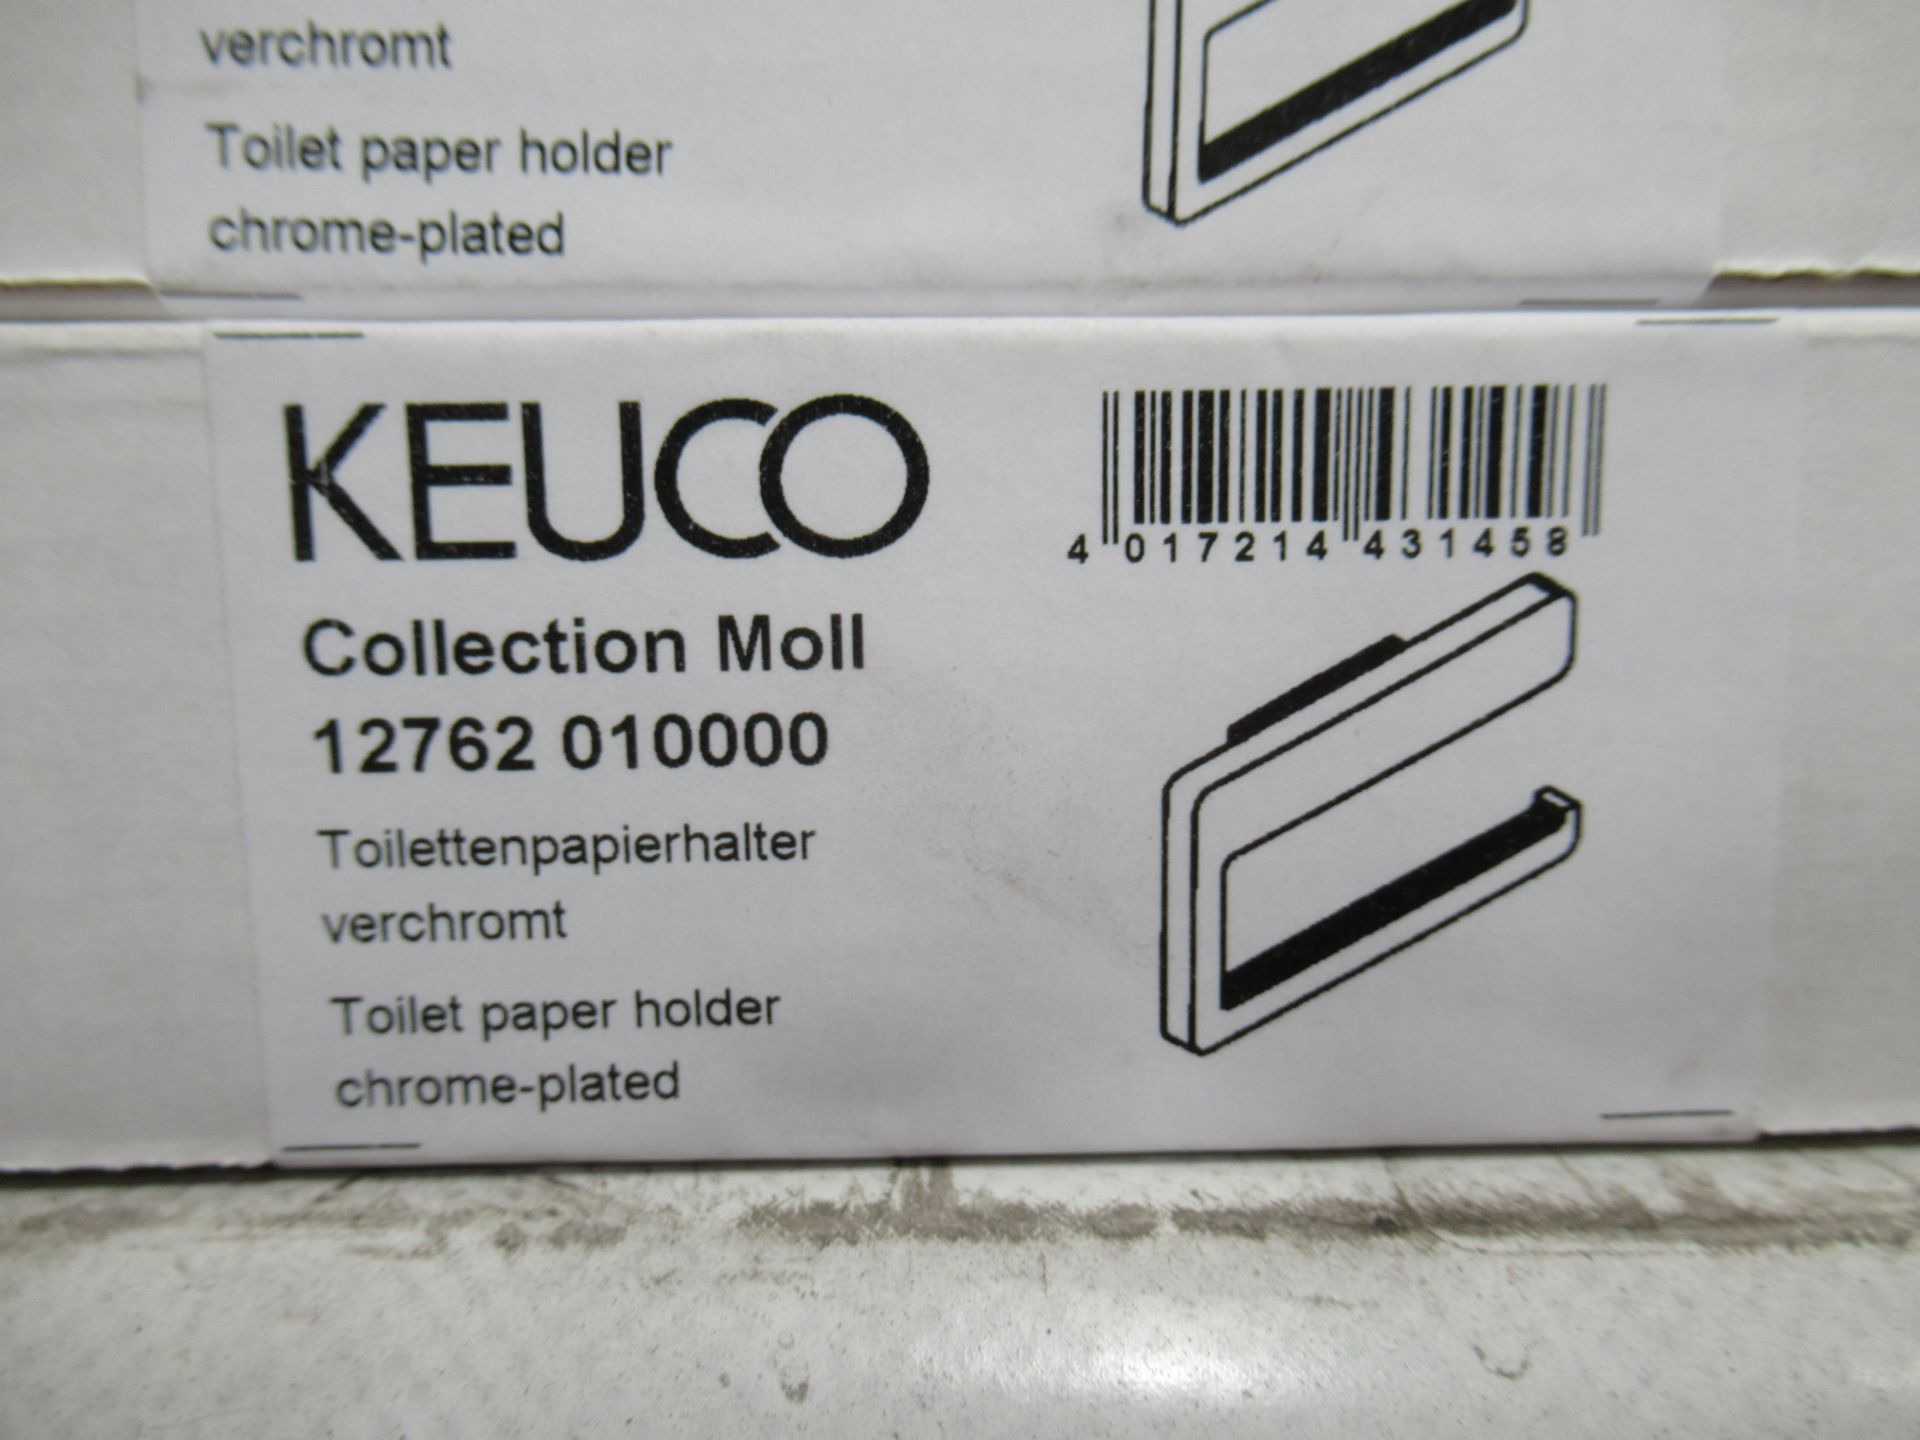 6 x Keuco Collection Moll Toilet Paper Holders Chrome Plated, P/N 12762-010000 - Image 2 of 2